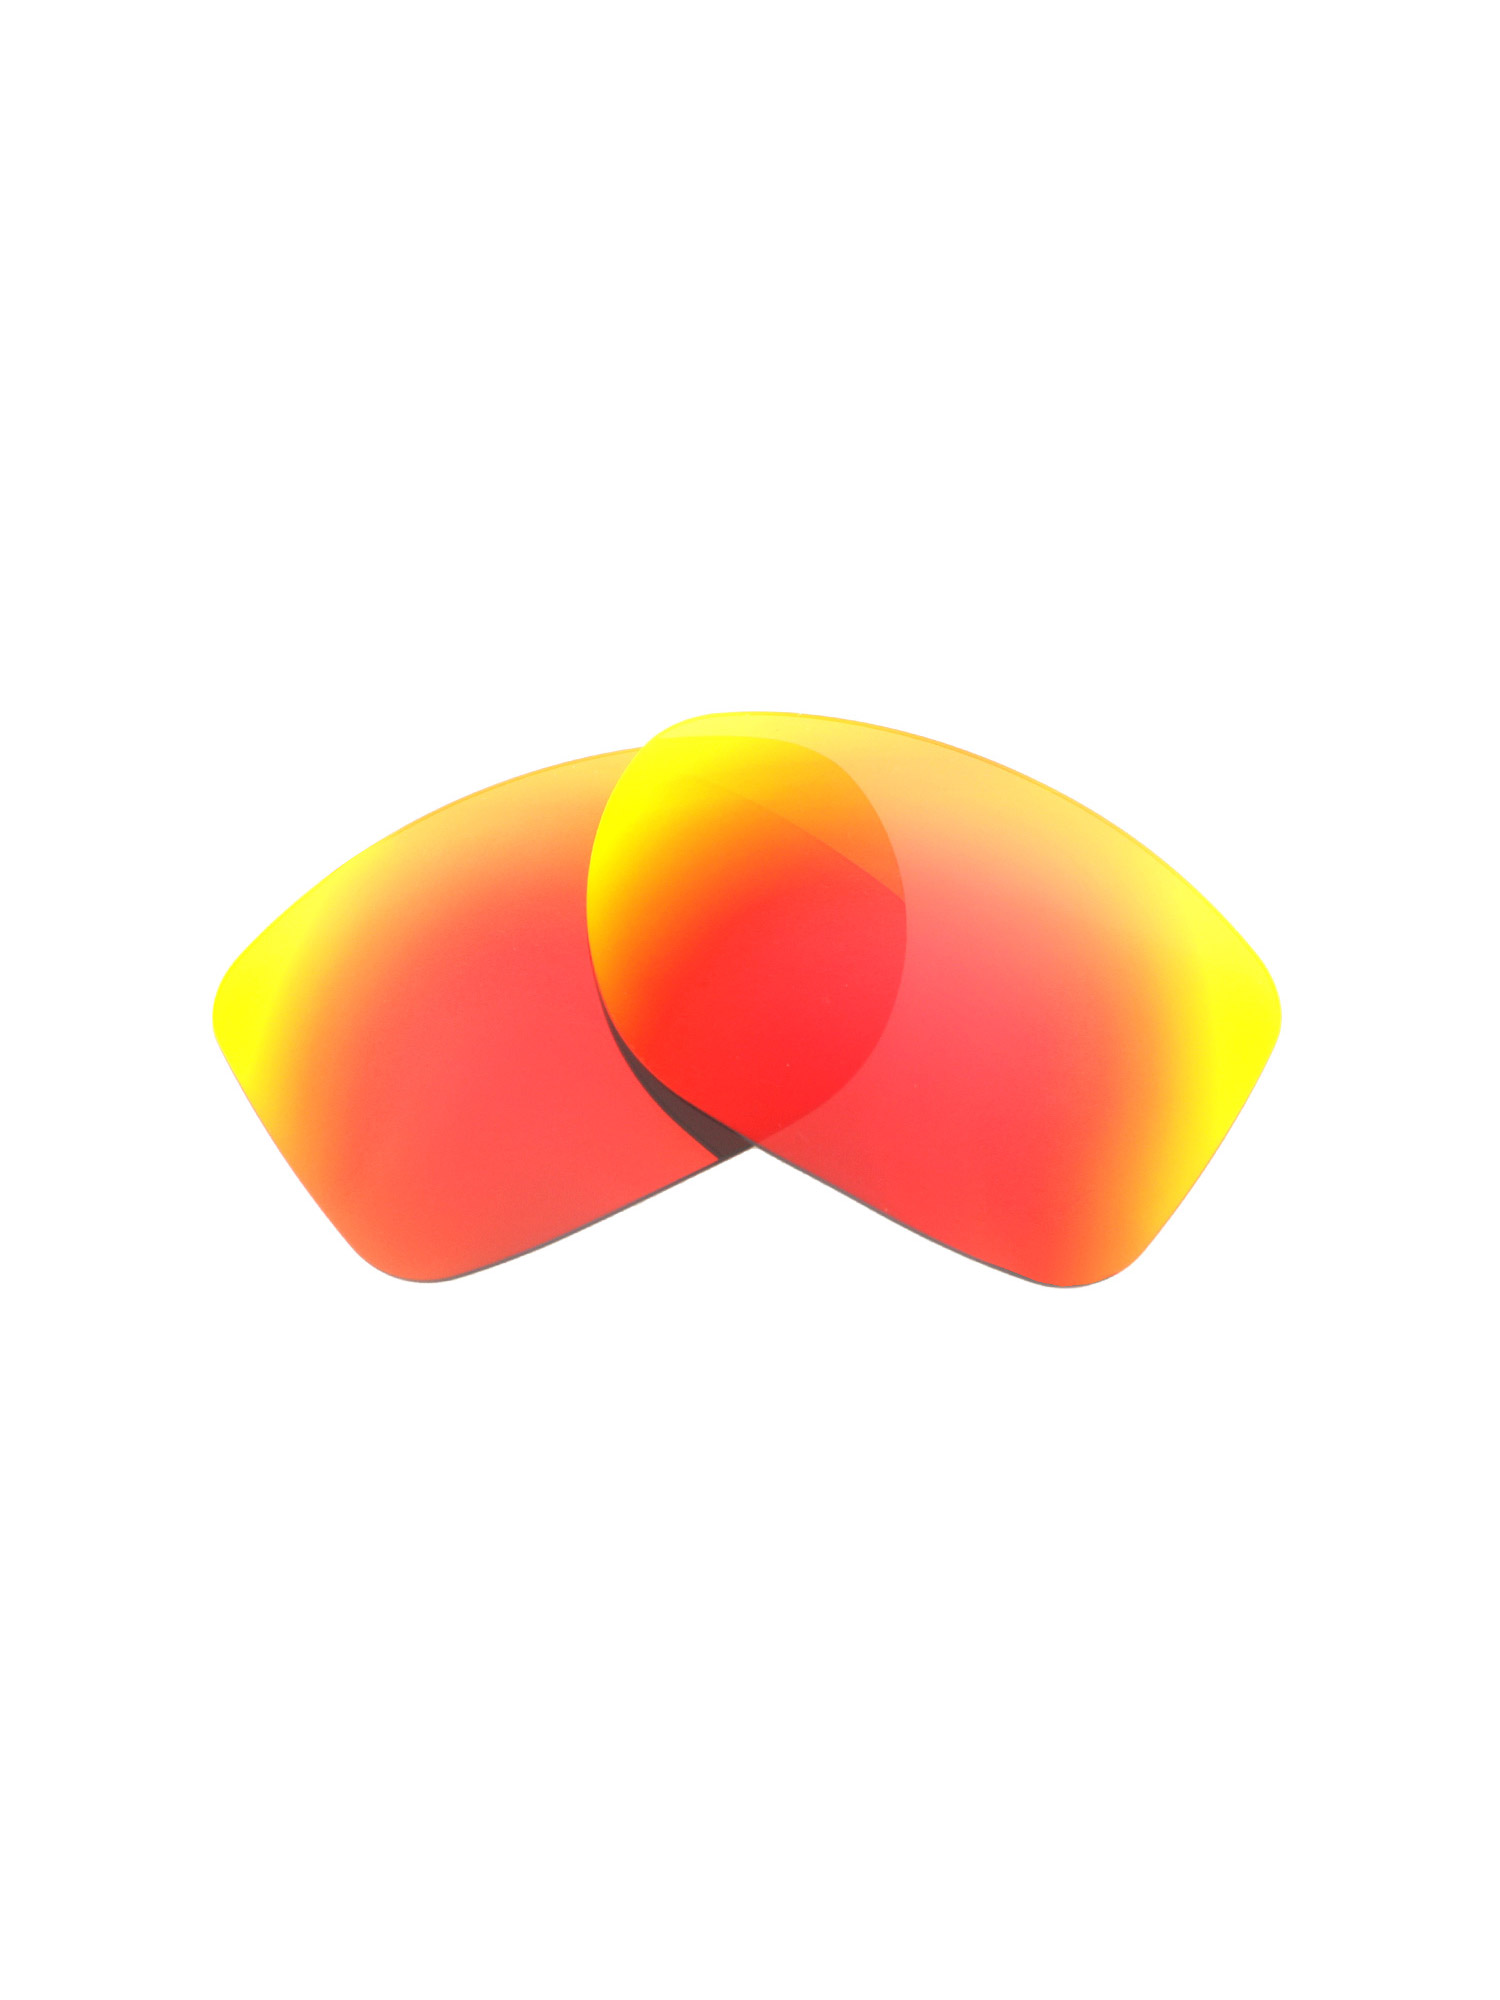 Walleva Fire Red Polarized Replacement Lenses for Oakley Gauge 8 M Sunglasses - image 2 of 7